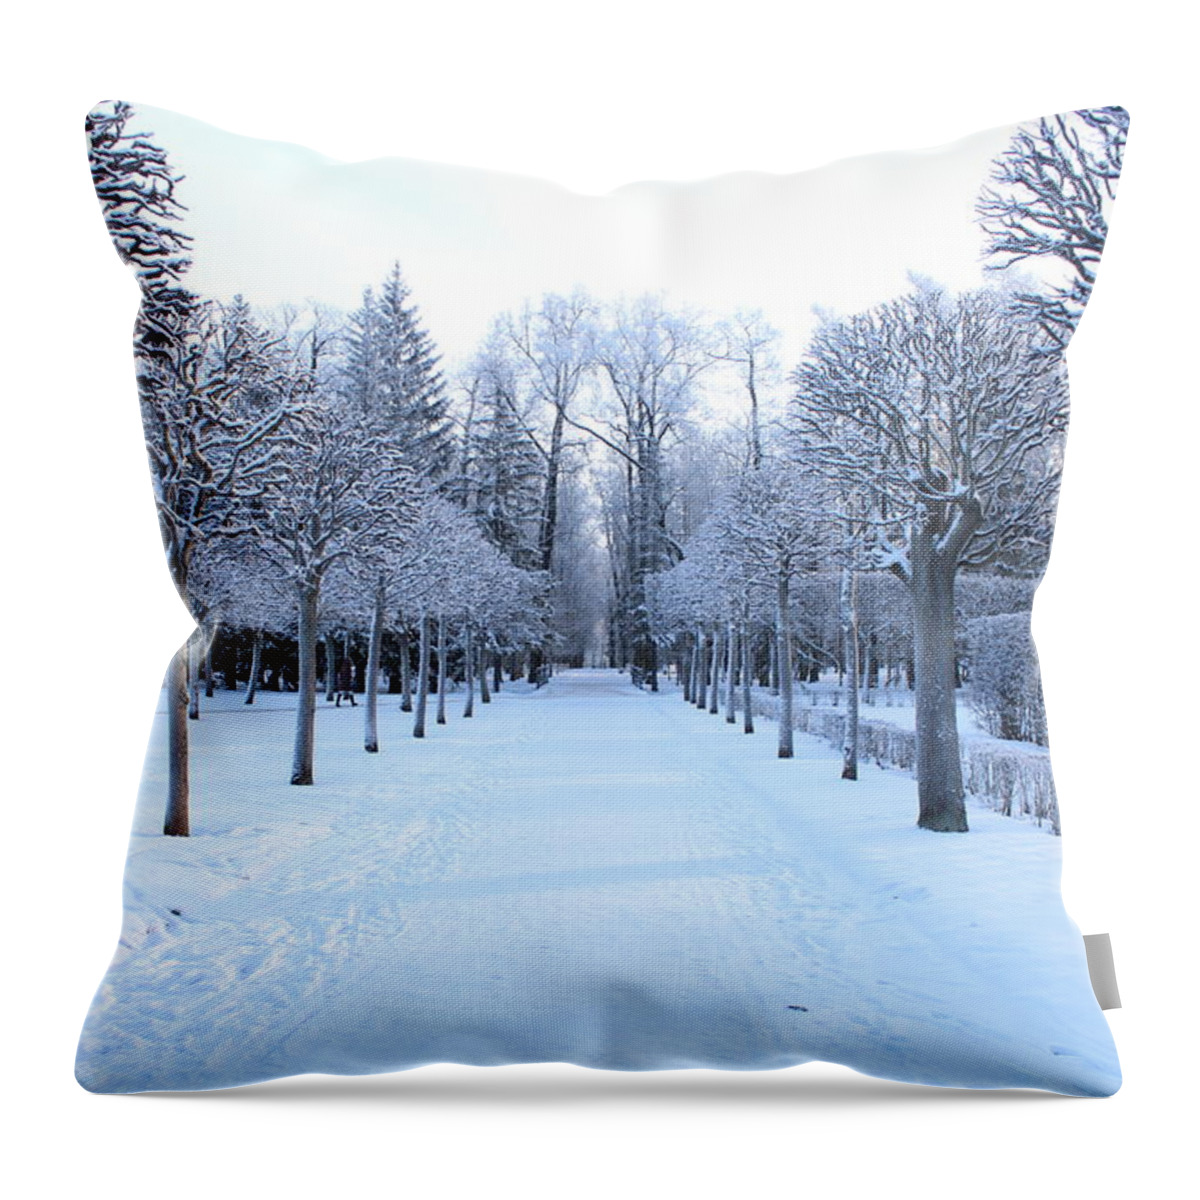 Trees In Snow Throw Pillow featuring the photograph Snowy Trees by FD Graham